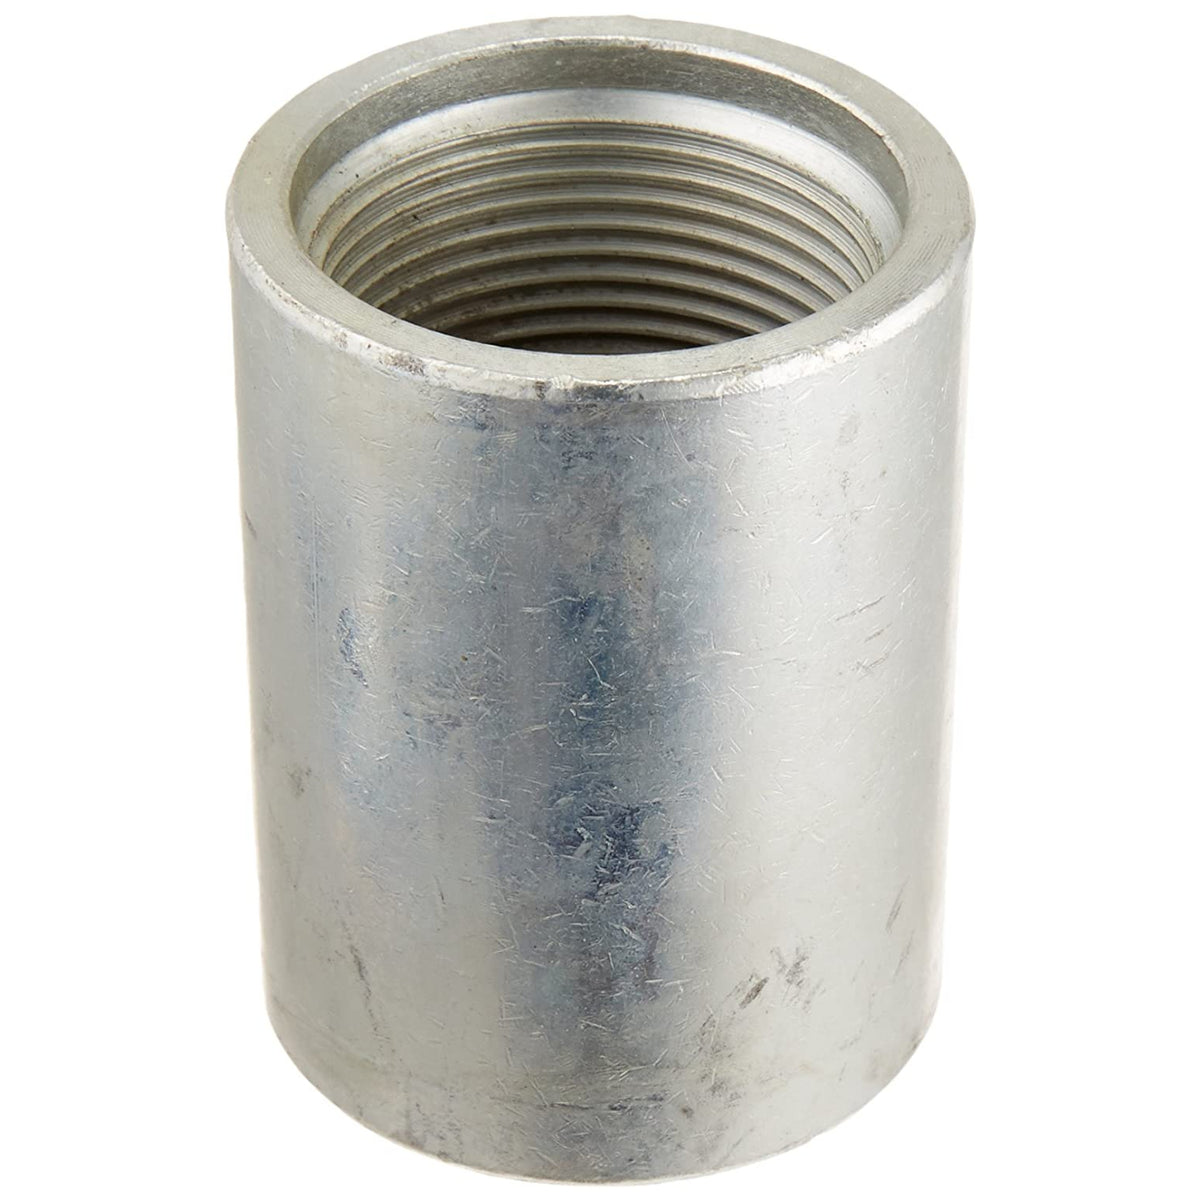 Simmons 946 Well Point Drive Coupling, Galvanized Steel, 1-1/4"